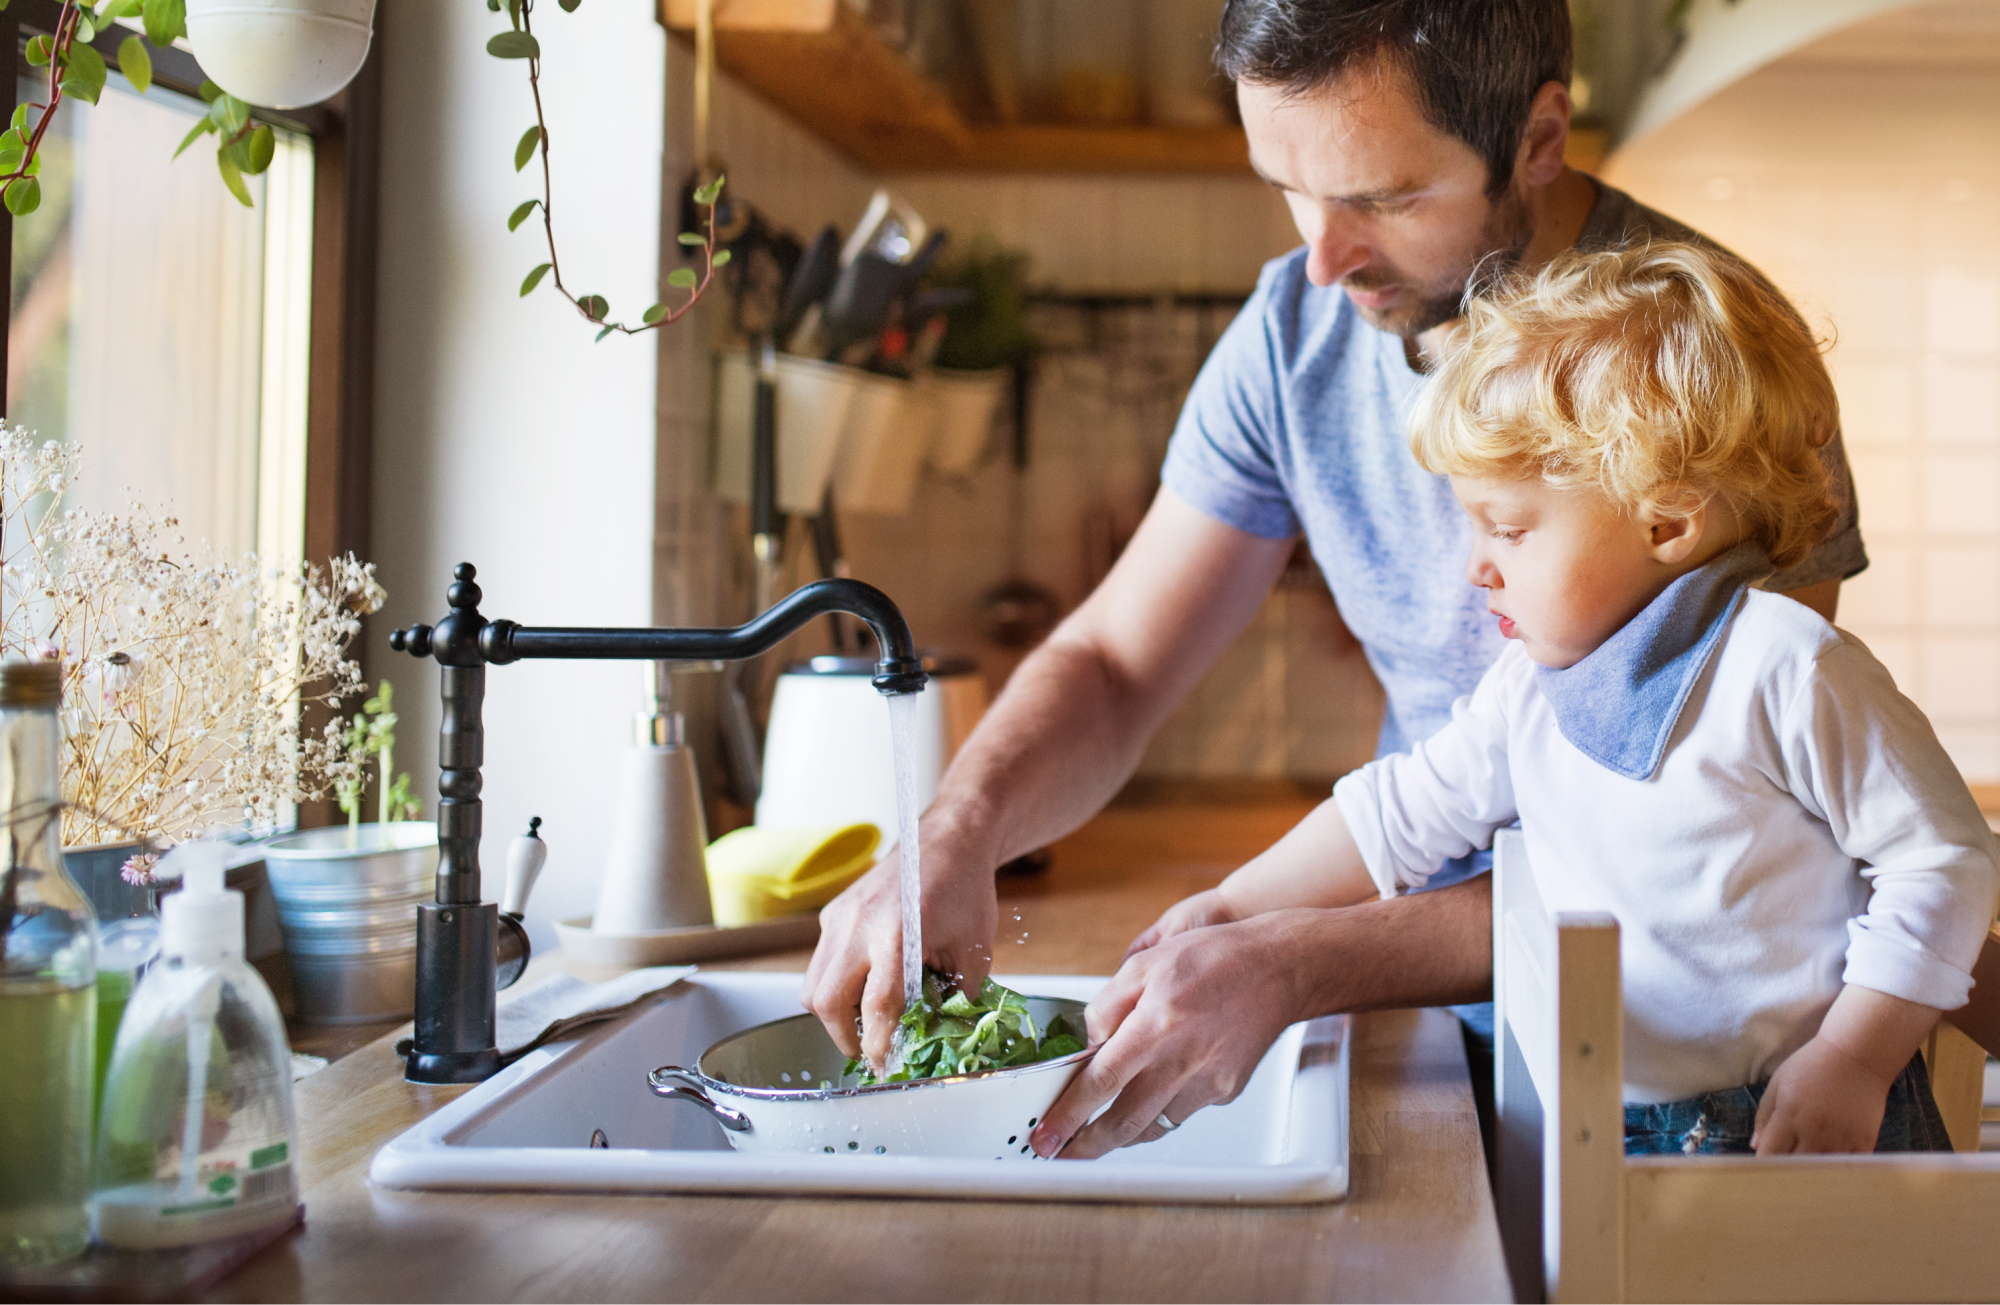 A father with a toddler boy washing vegetables in a kitchen sink